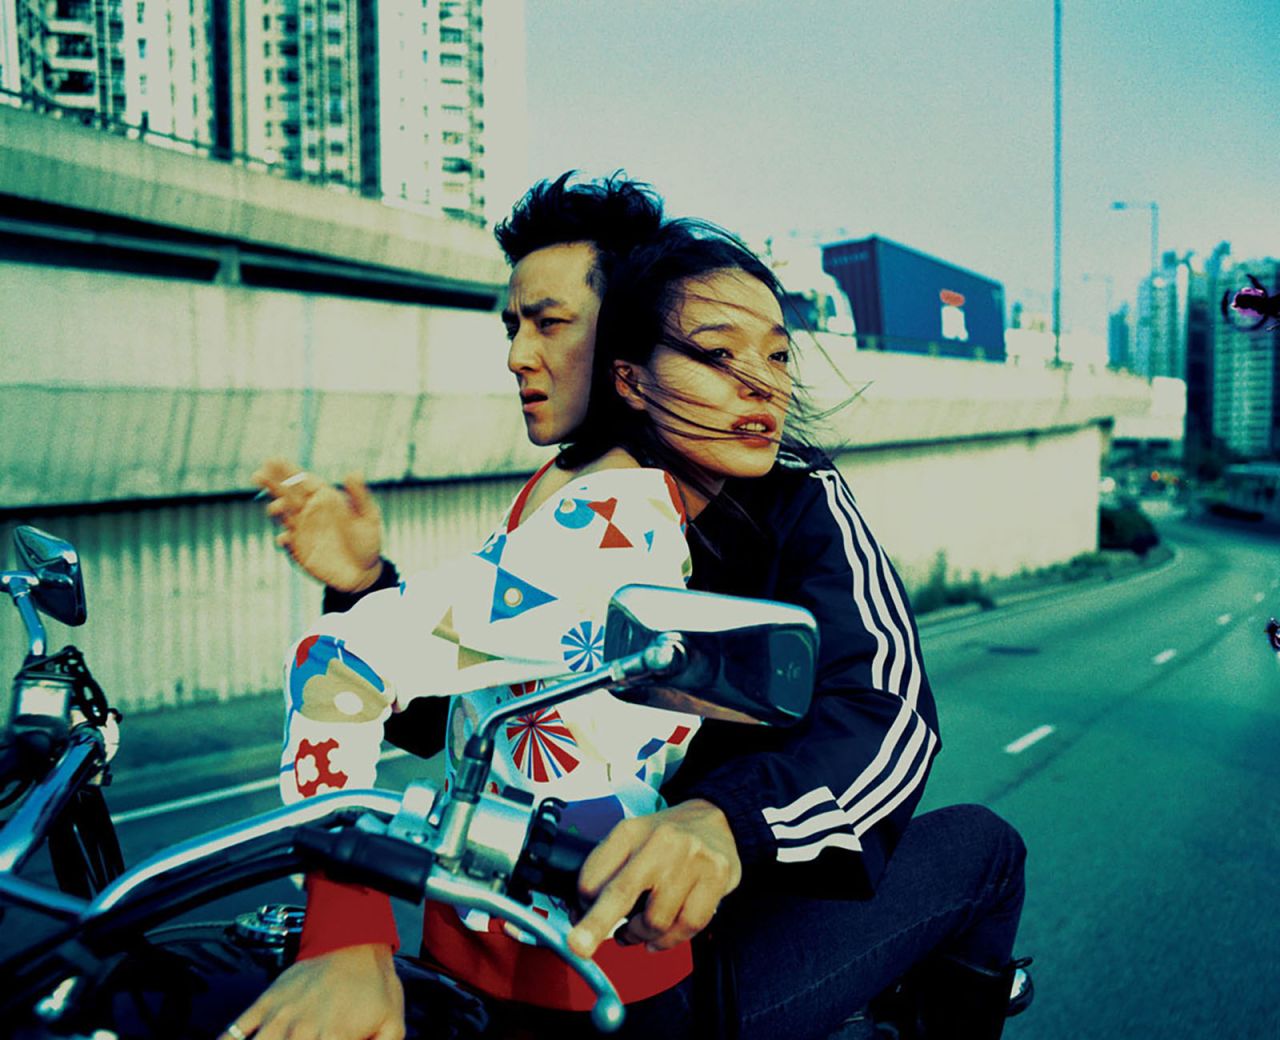 After working for Wong Kar Wai, Wing spent years shooting editorials for fashion magazine i-D. In this classic image, actress Shu Qi rides atop a motorcycle piloted through Hong Kong by Daniel Wu -- a cross-processed fantasy of youthful anomie.